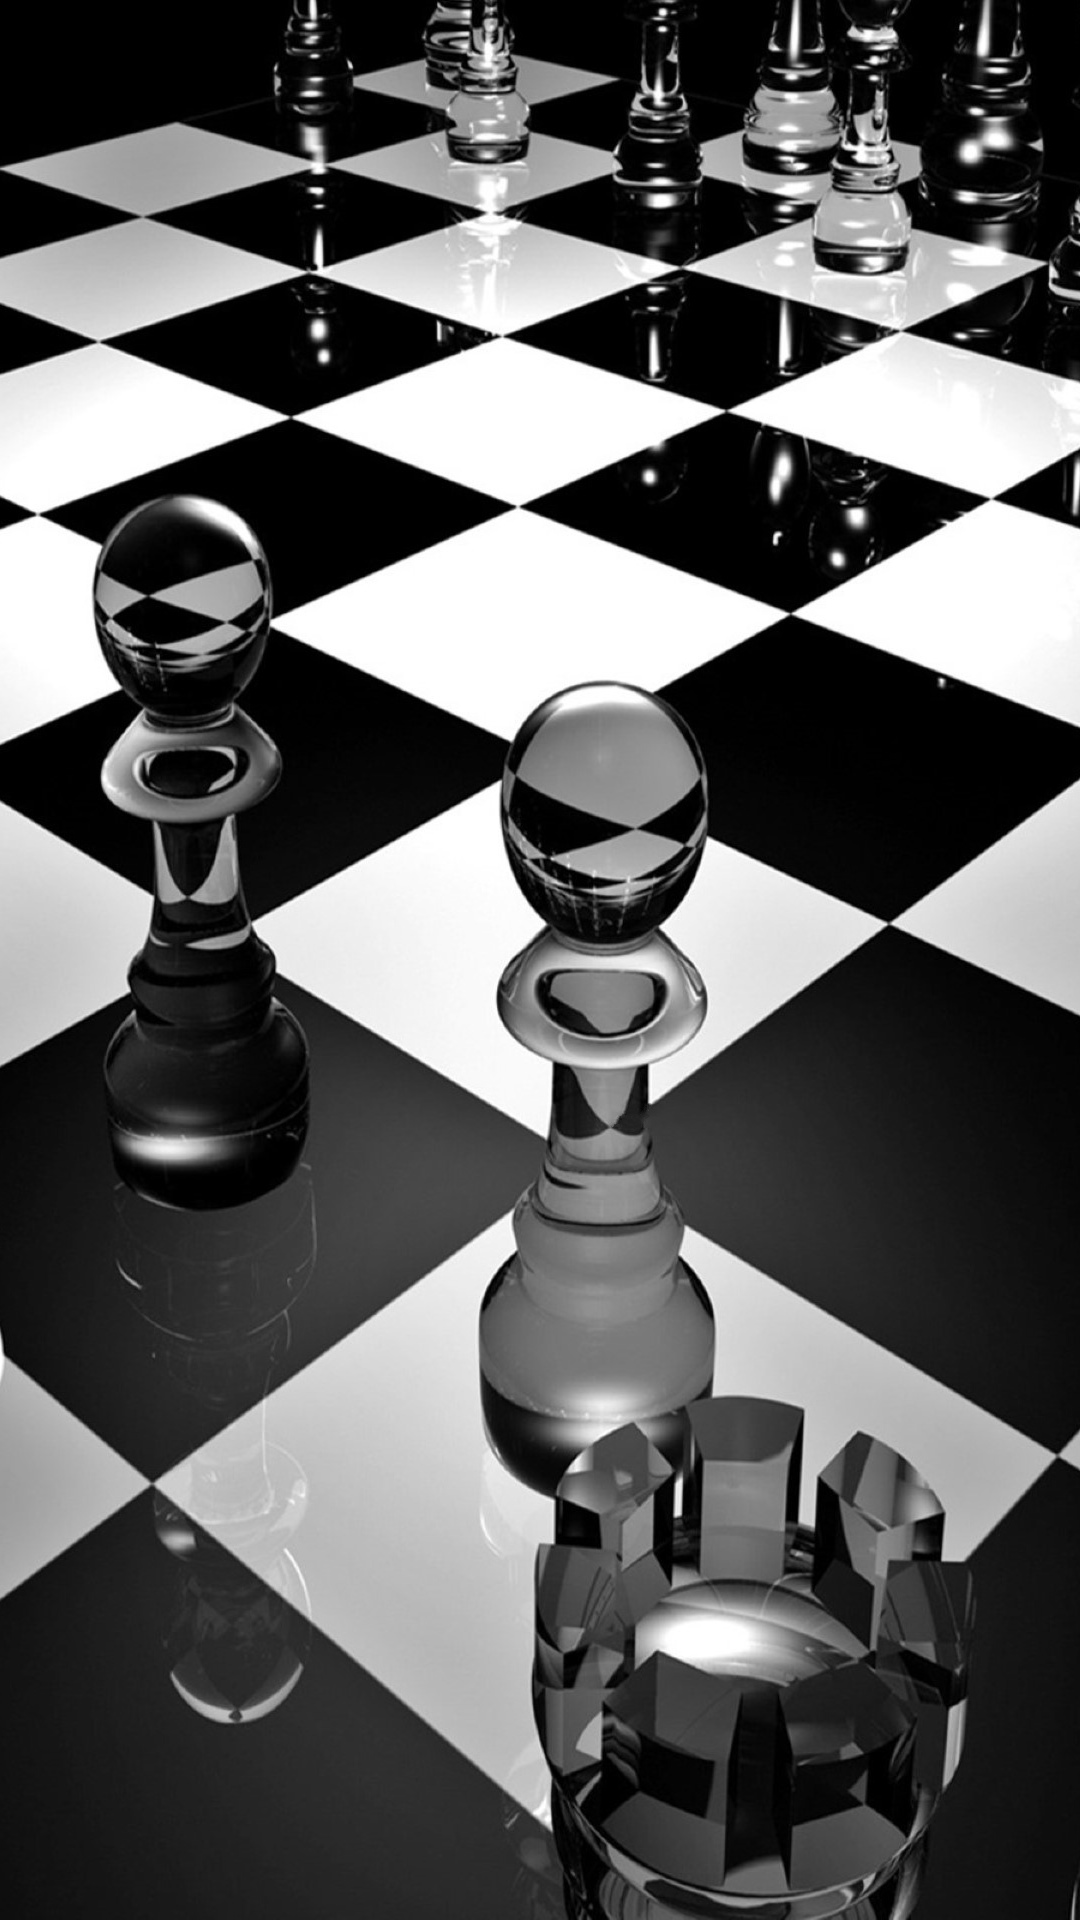 Free Download Chess Board Wallpaper 1080x19 For Your Desktop Mobile Tablet Explore 73 Chess Board Wallpaper Chess Desktop Wallpaper 3d Chess Wallpaper 3d Chess Board Wallpaper